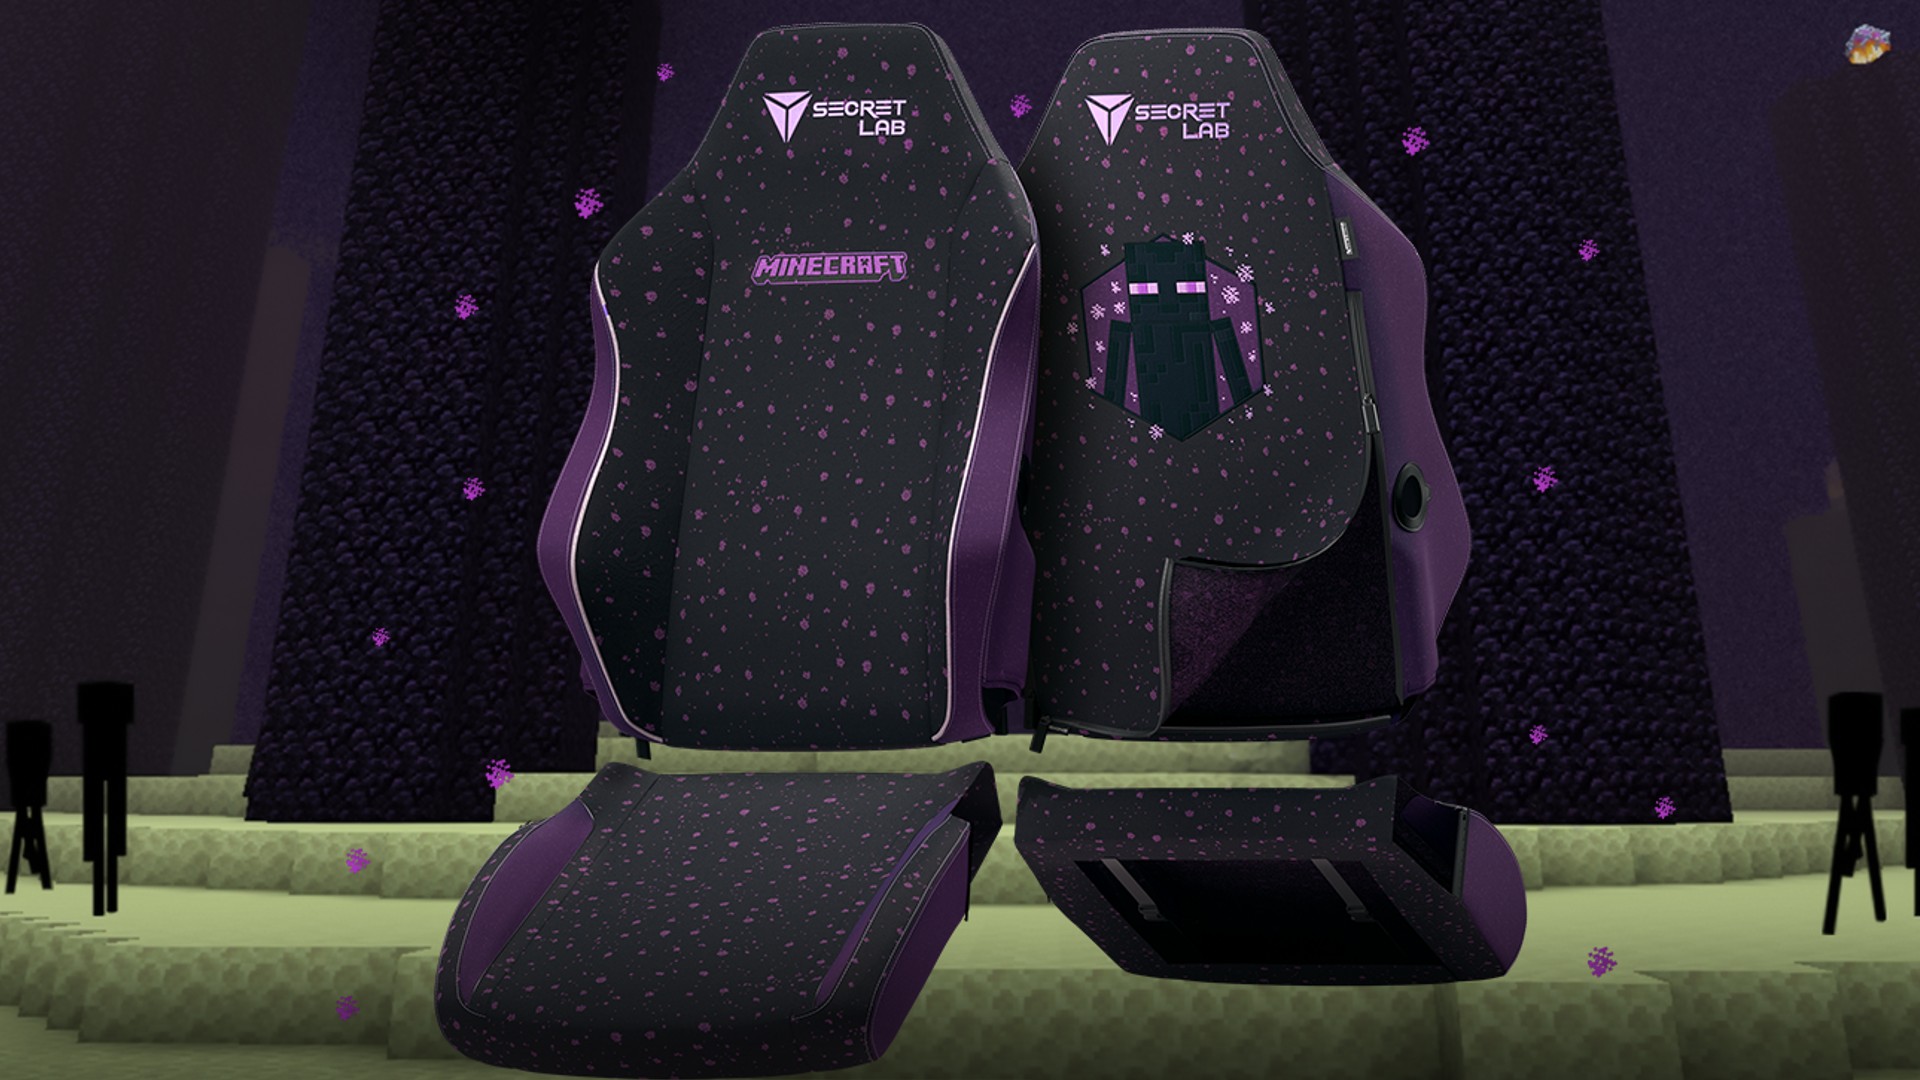 These new Secretlab Skins are a necessity to-have for Minecraft admirers